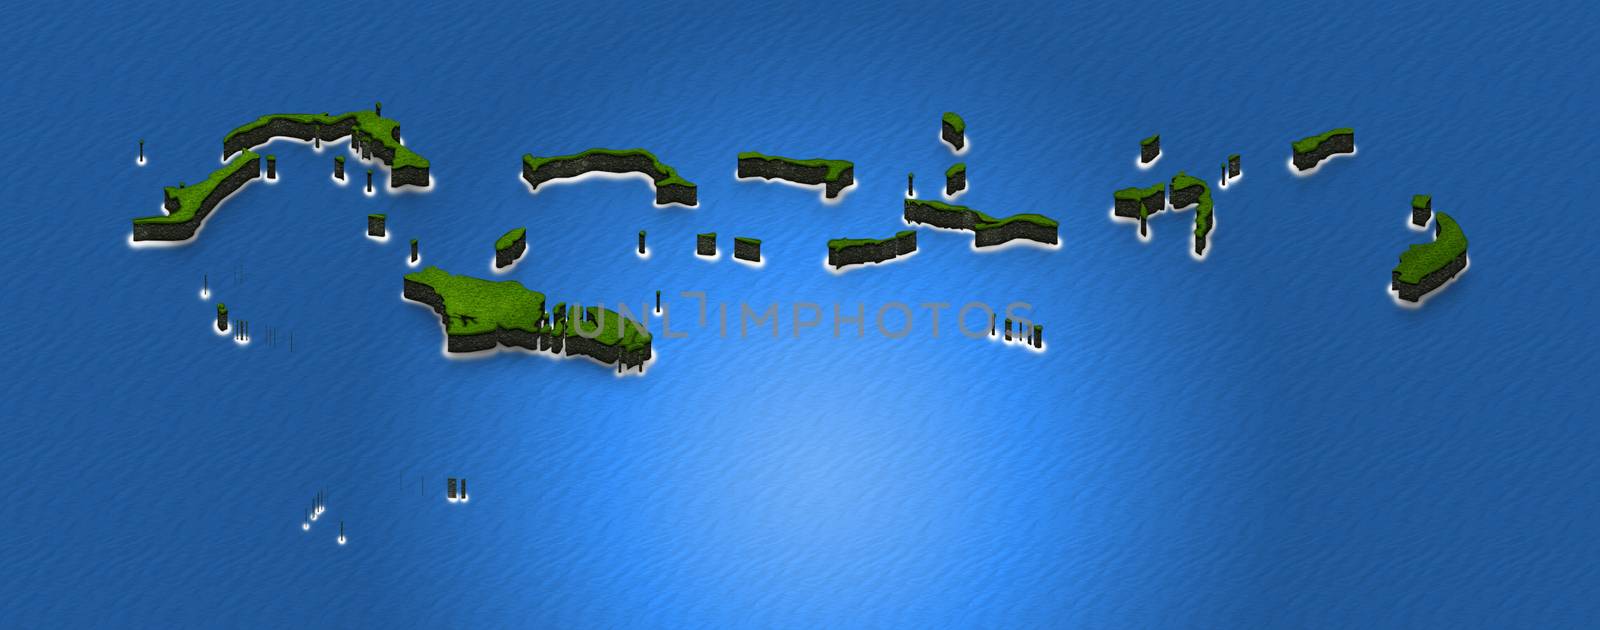 Map of Bahamas. 3D isometric perspective illustration. by sanches812